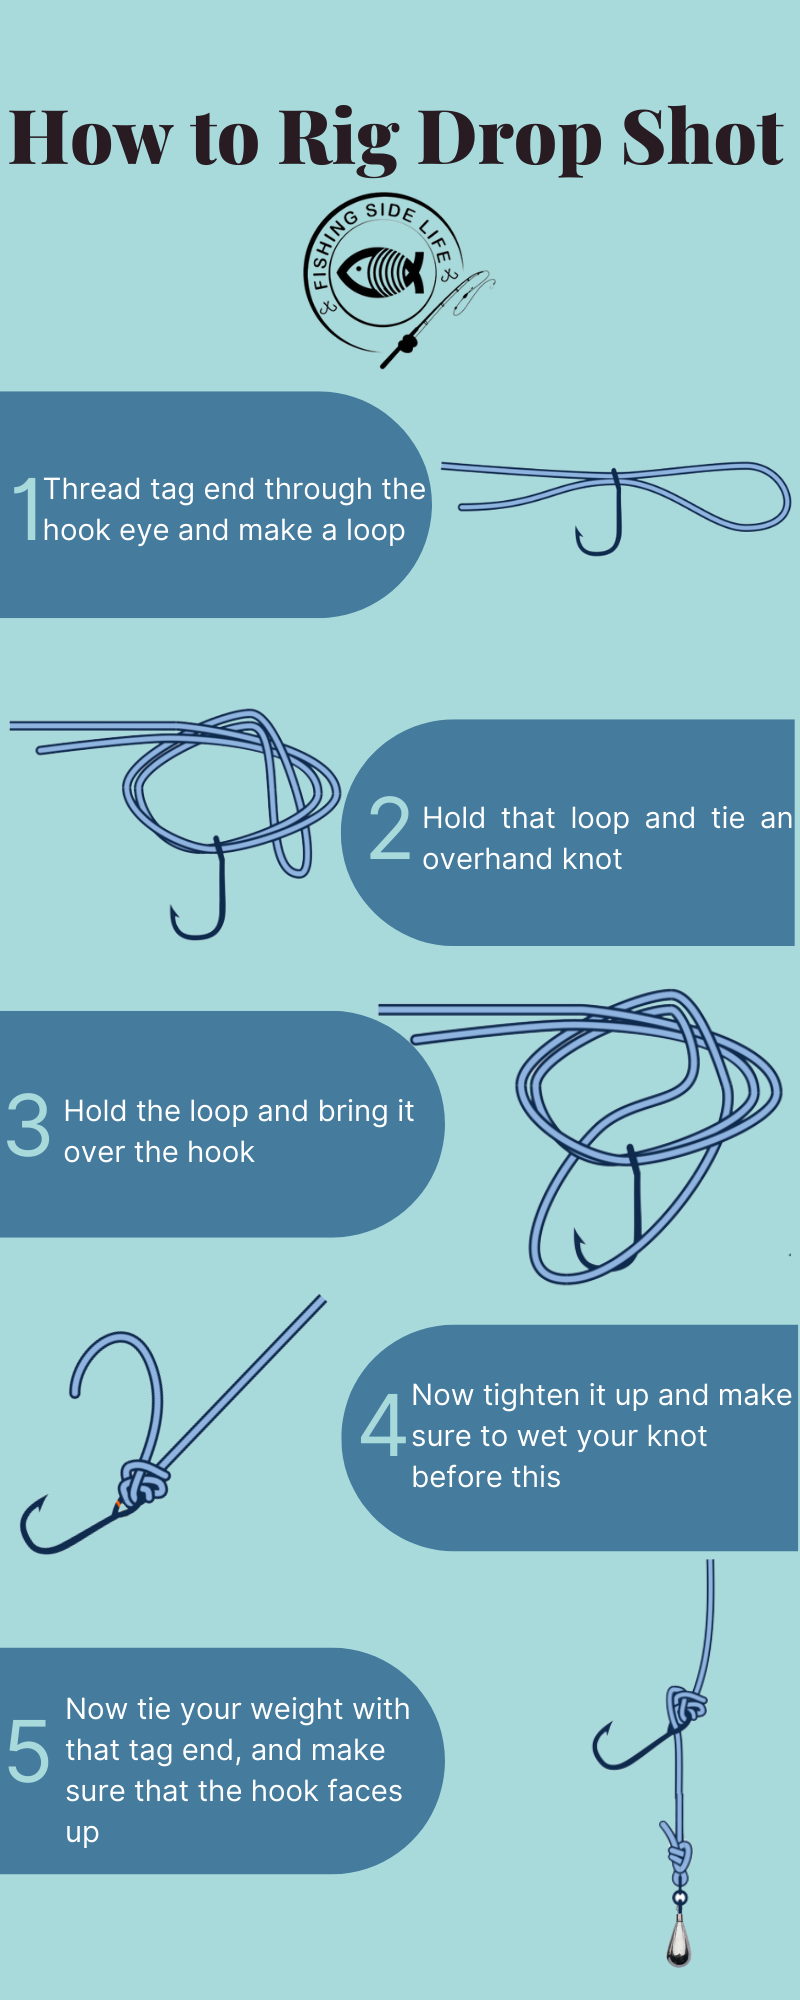 How to tie a Drop Shot Rig. To begin, dispel the myth that a drop